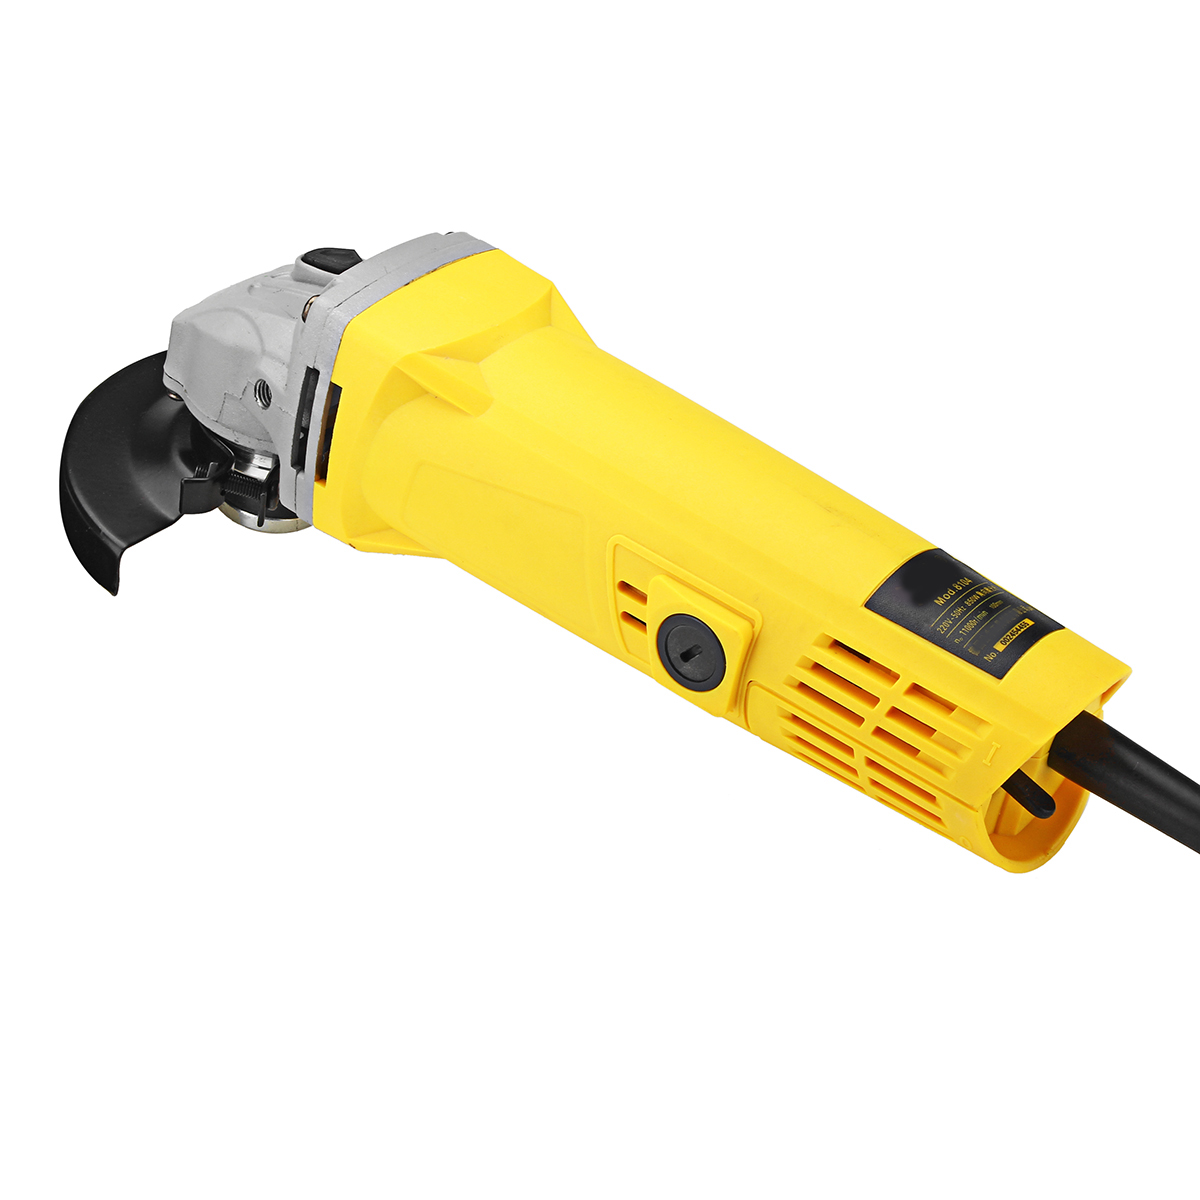 100mm-850W-220V-Portable-Electric-Angle-Grinder-Muti-Function-Household-Polish-Machine-Grinding-Cutt-1391941-6